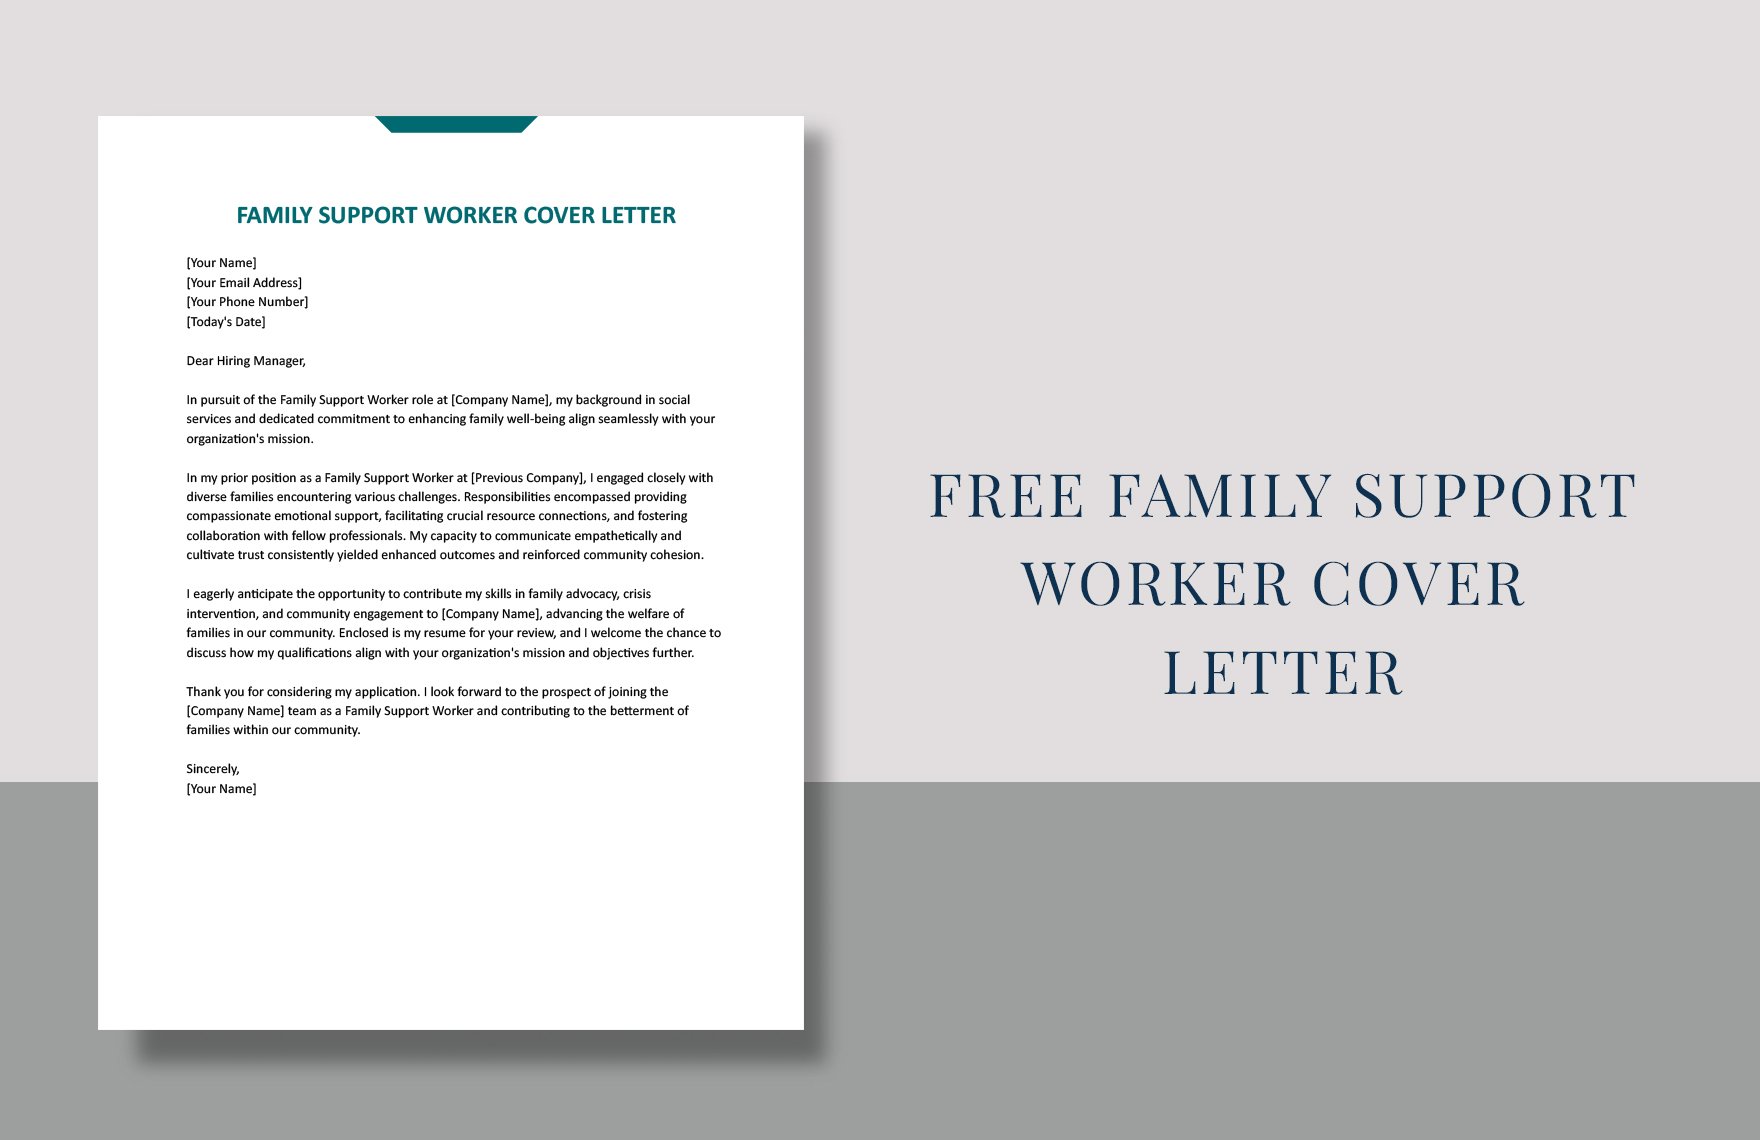 Family Support Worker Cover Letter in Word, Google Docs